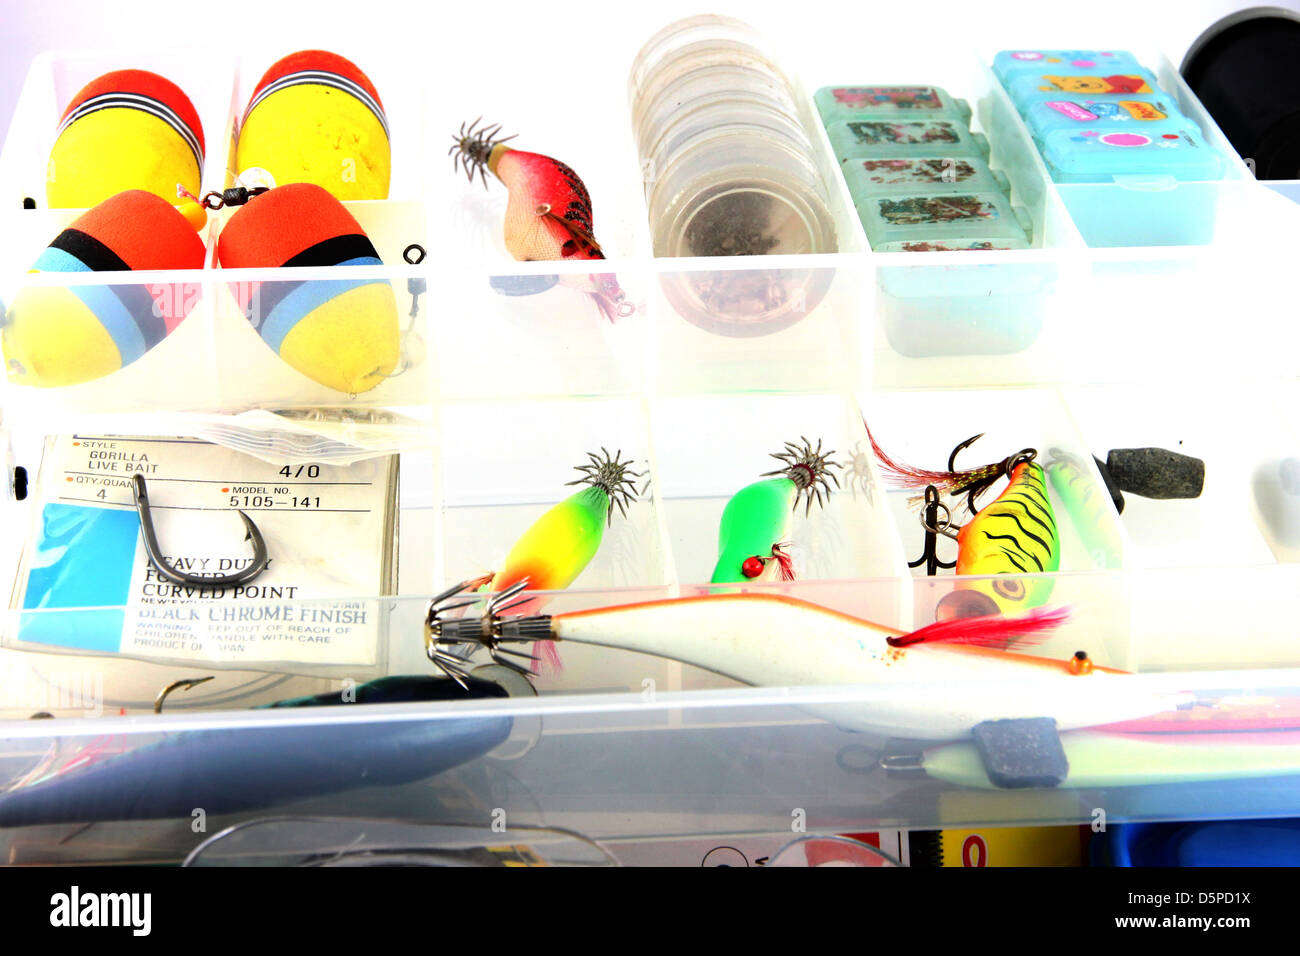 https://c8.alamy.com/comp/D5PD1X/the-fishing-accessories-in-the-white-box-D5PD1X.jpg